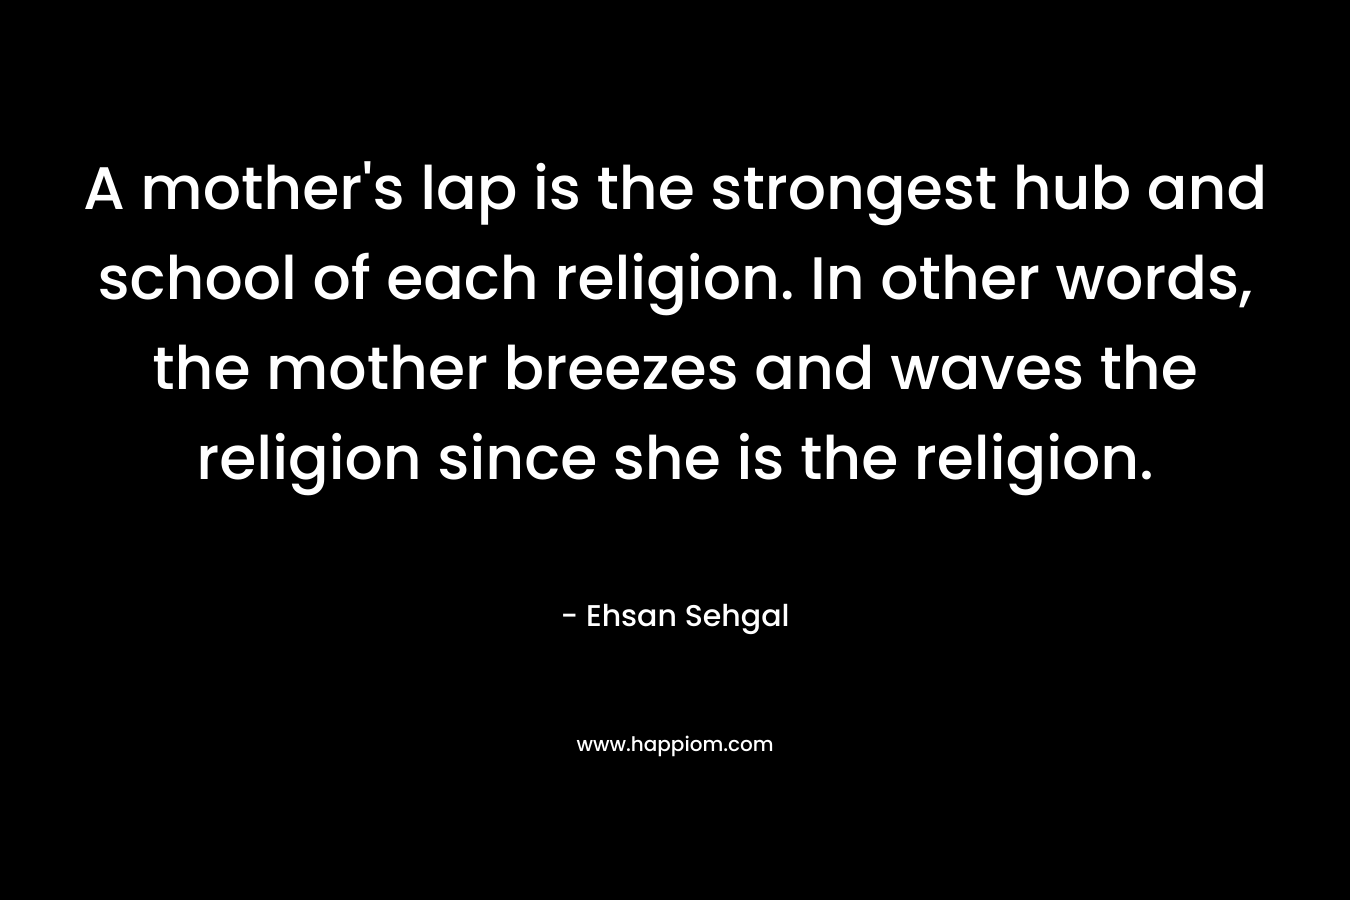 A mother’s lap is the strongest hub and school of each religion. In other words, the mother breezes and waves the religion since she is the religion. – Ehsan Sehgal